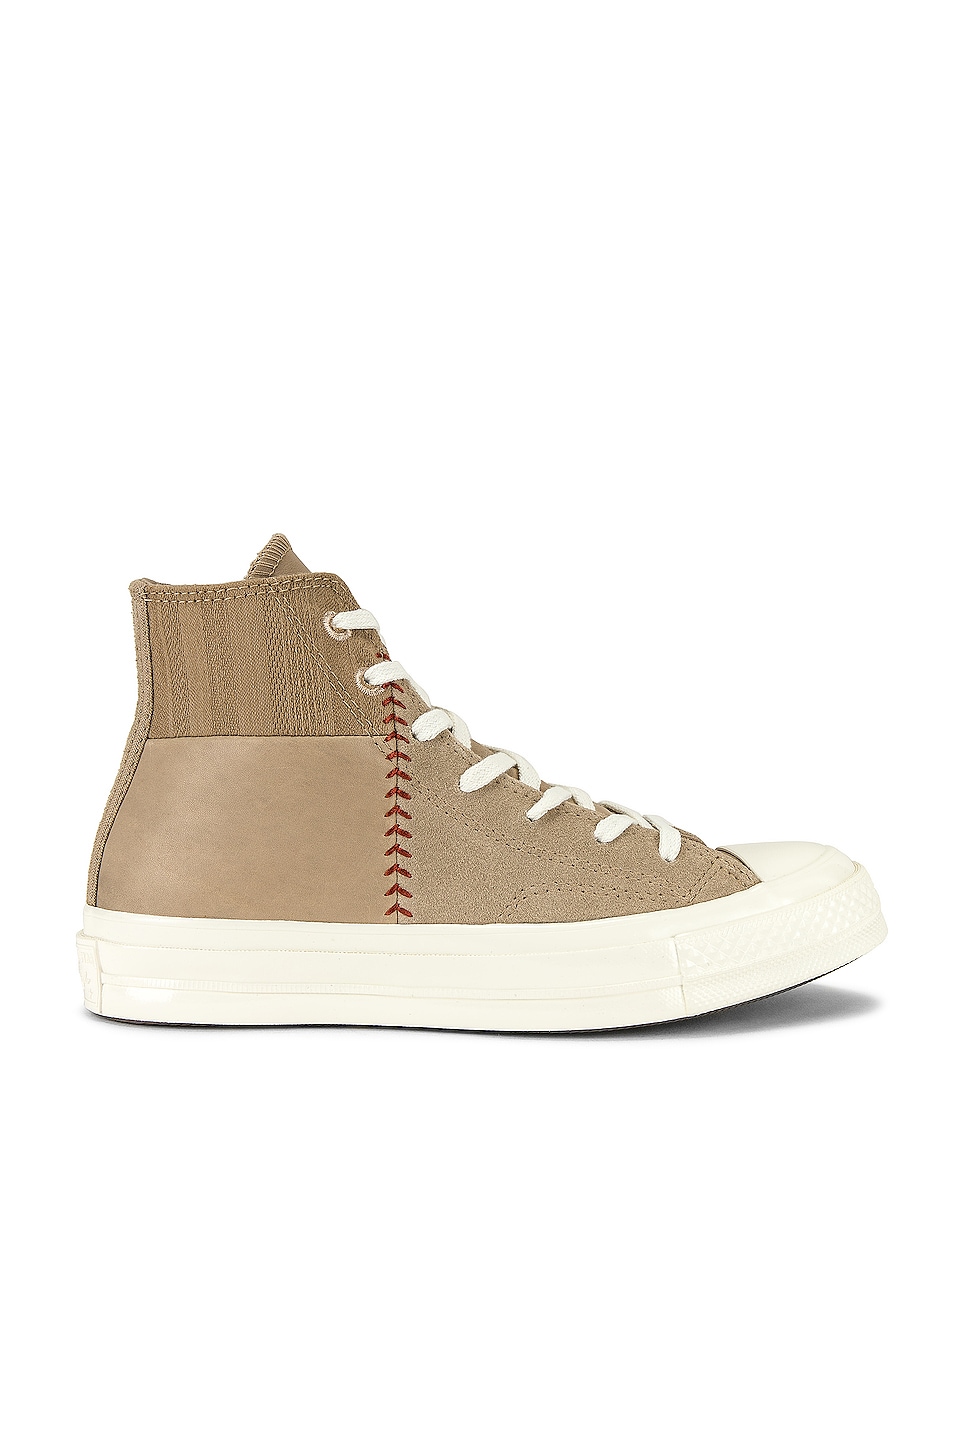 Converse Chuck 70 Crafted Split Construction Sneaker in Nomad Khaki ...